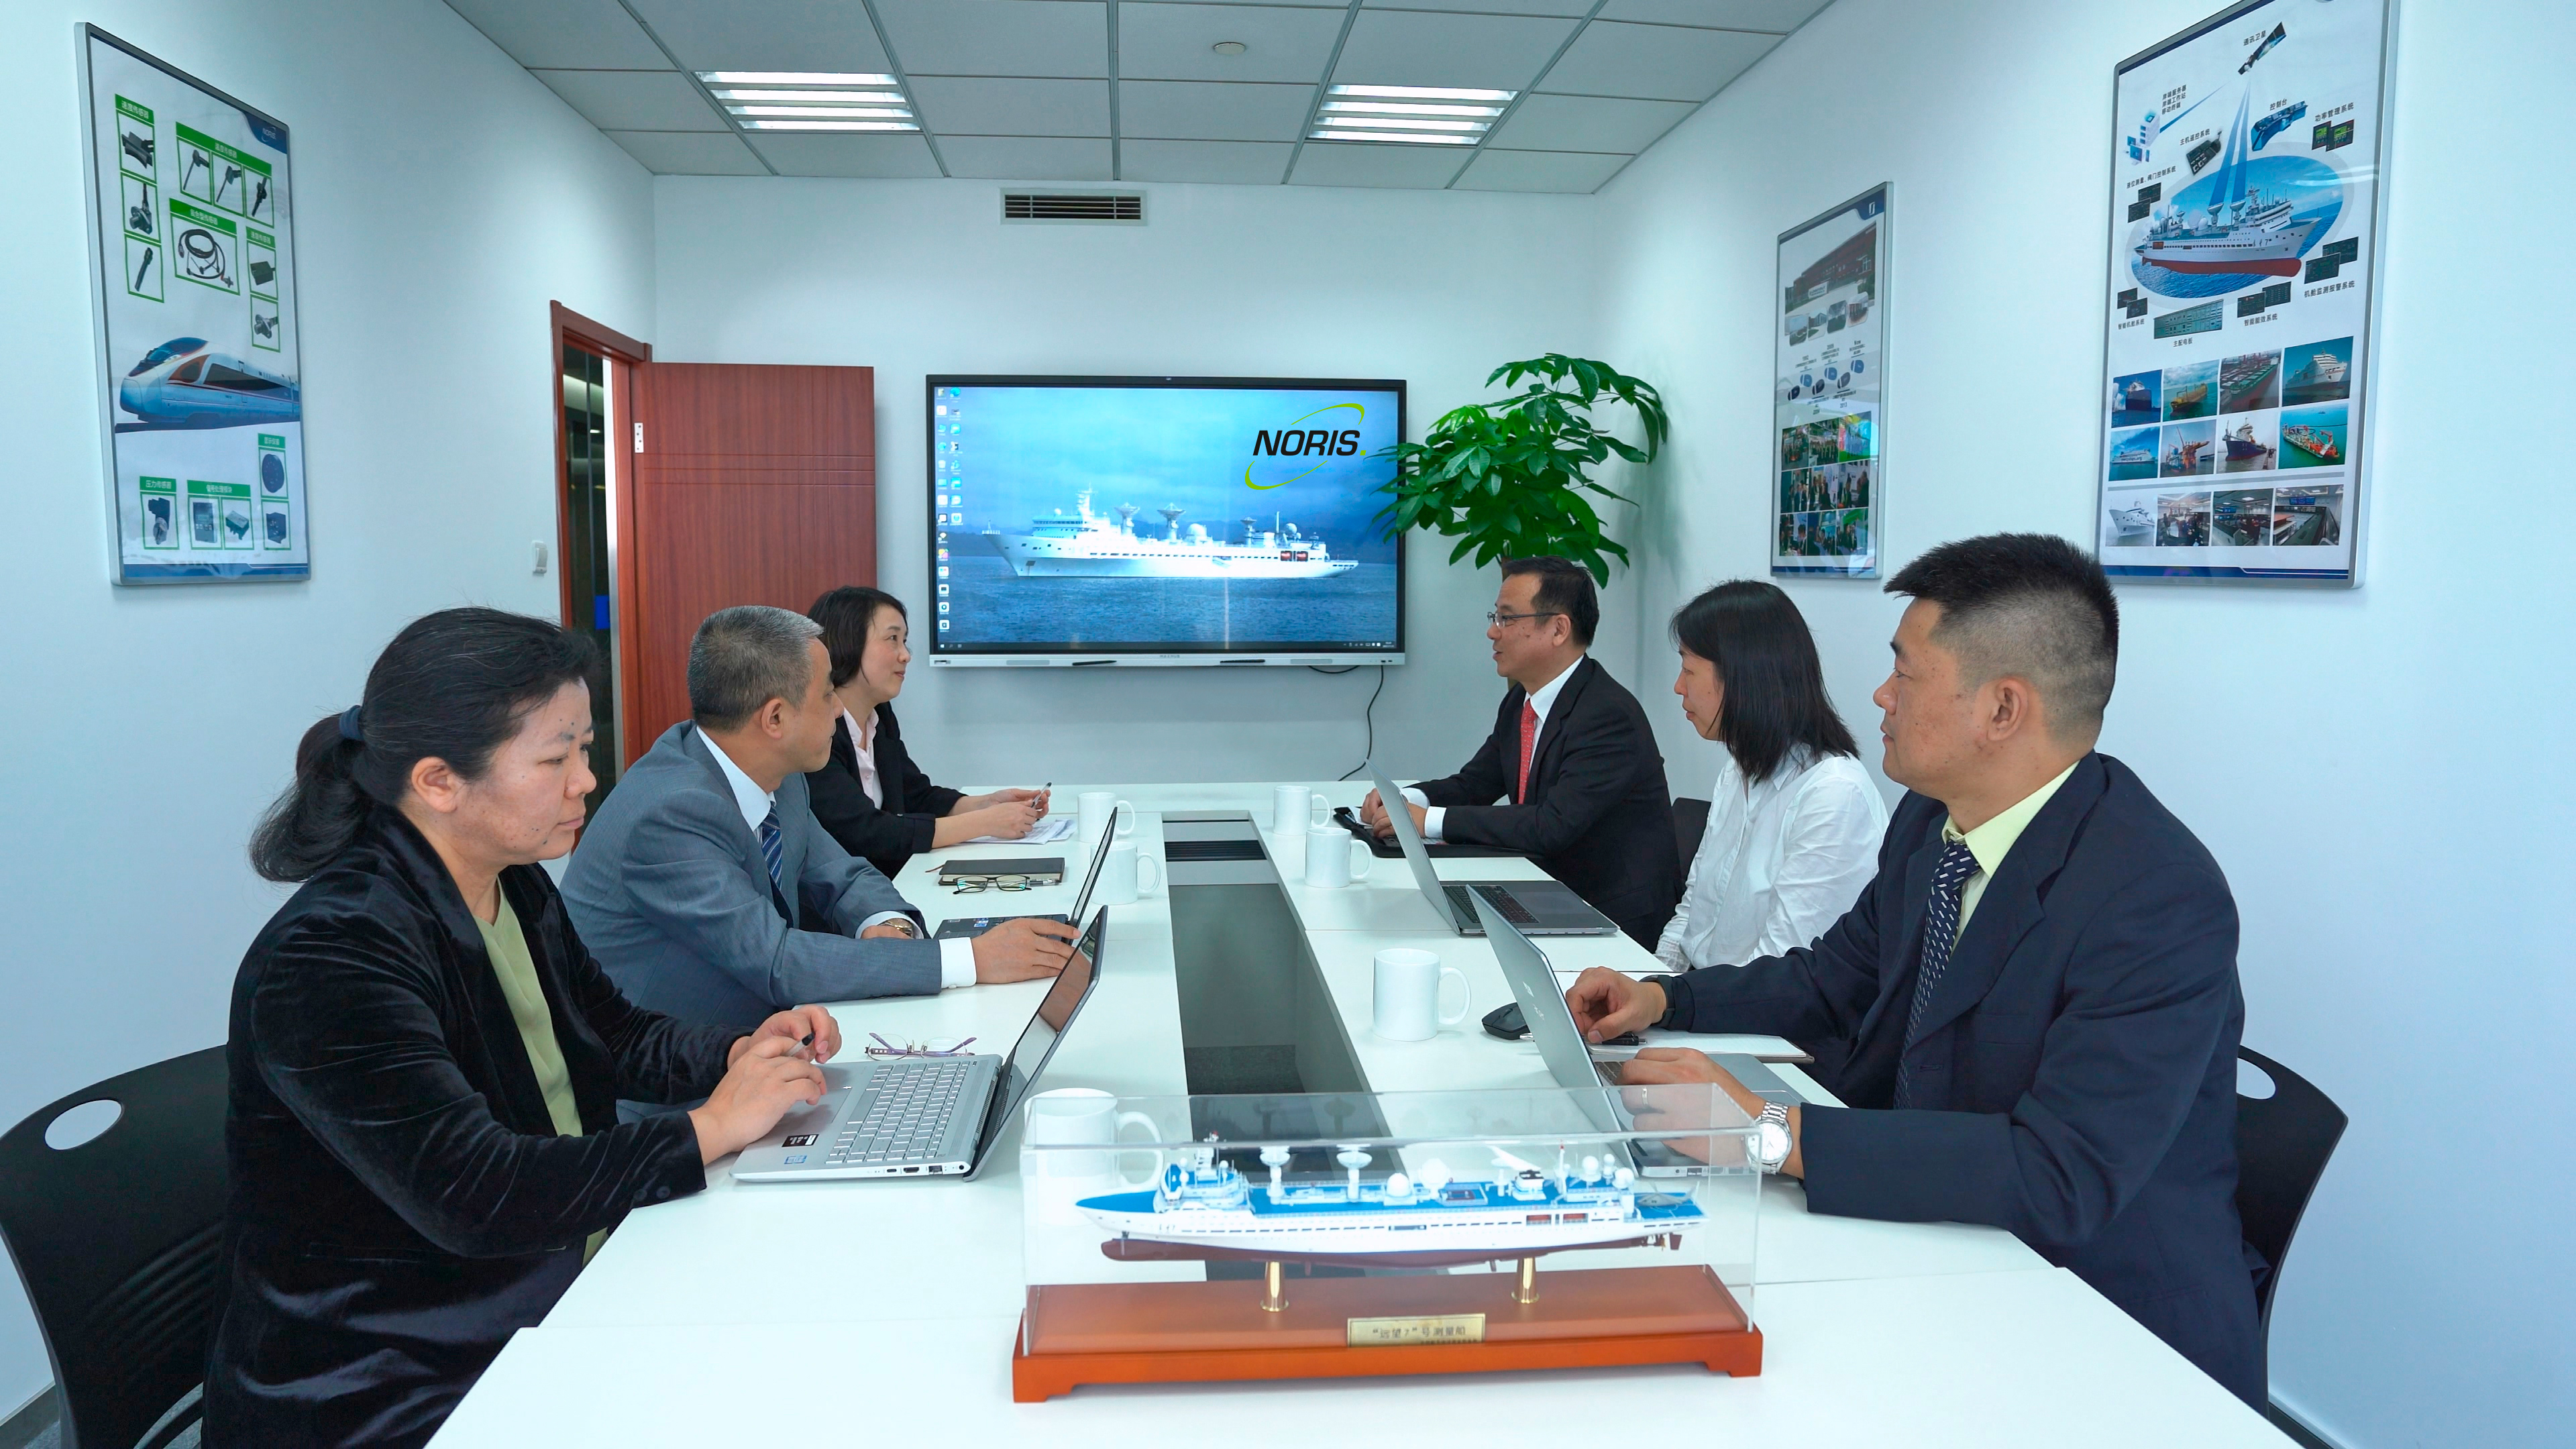 The image shows the Noris-Sibo Automation team in company office